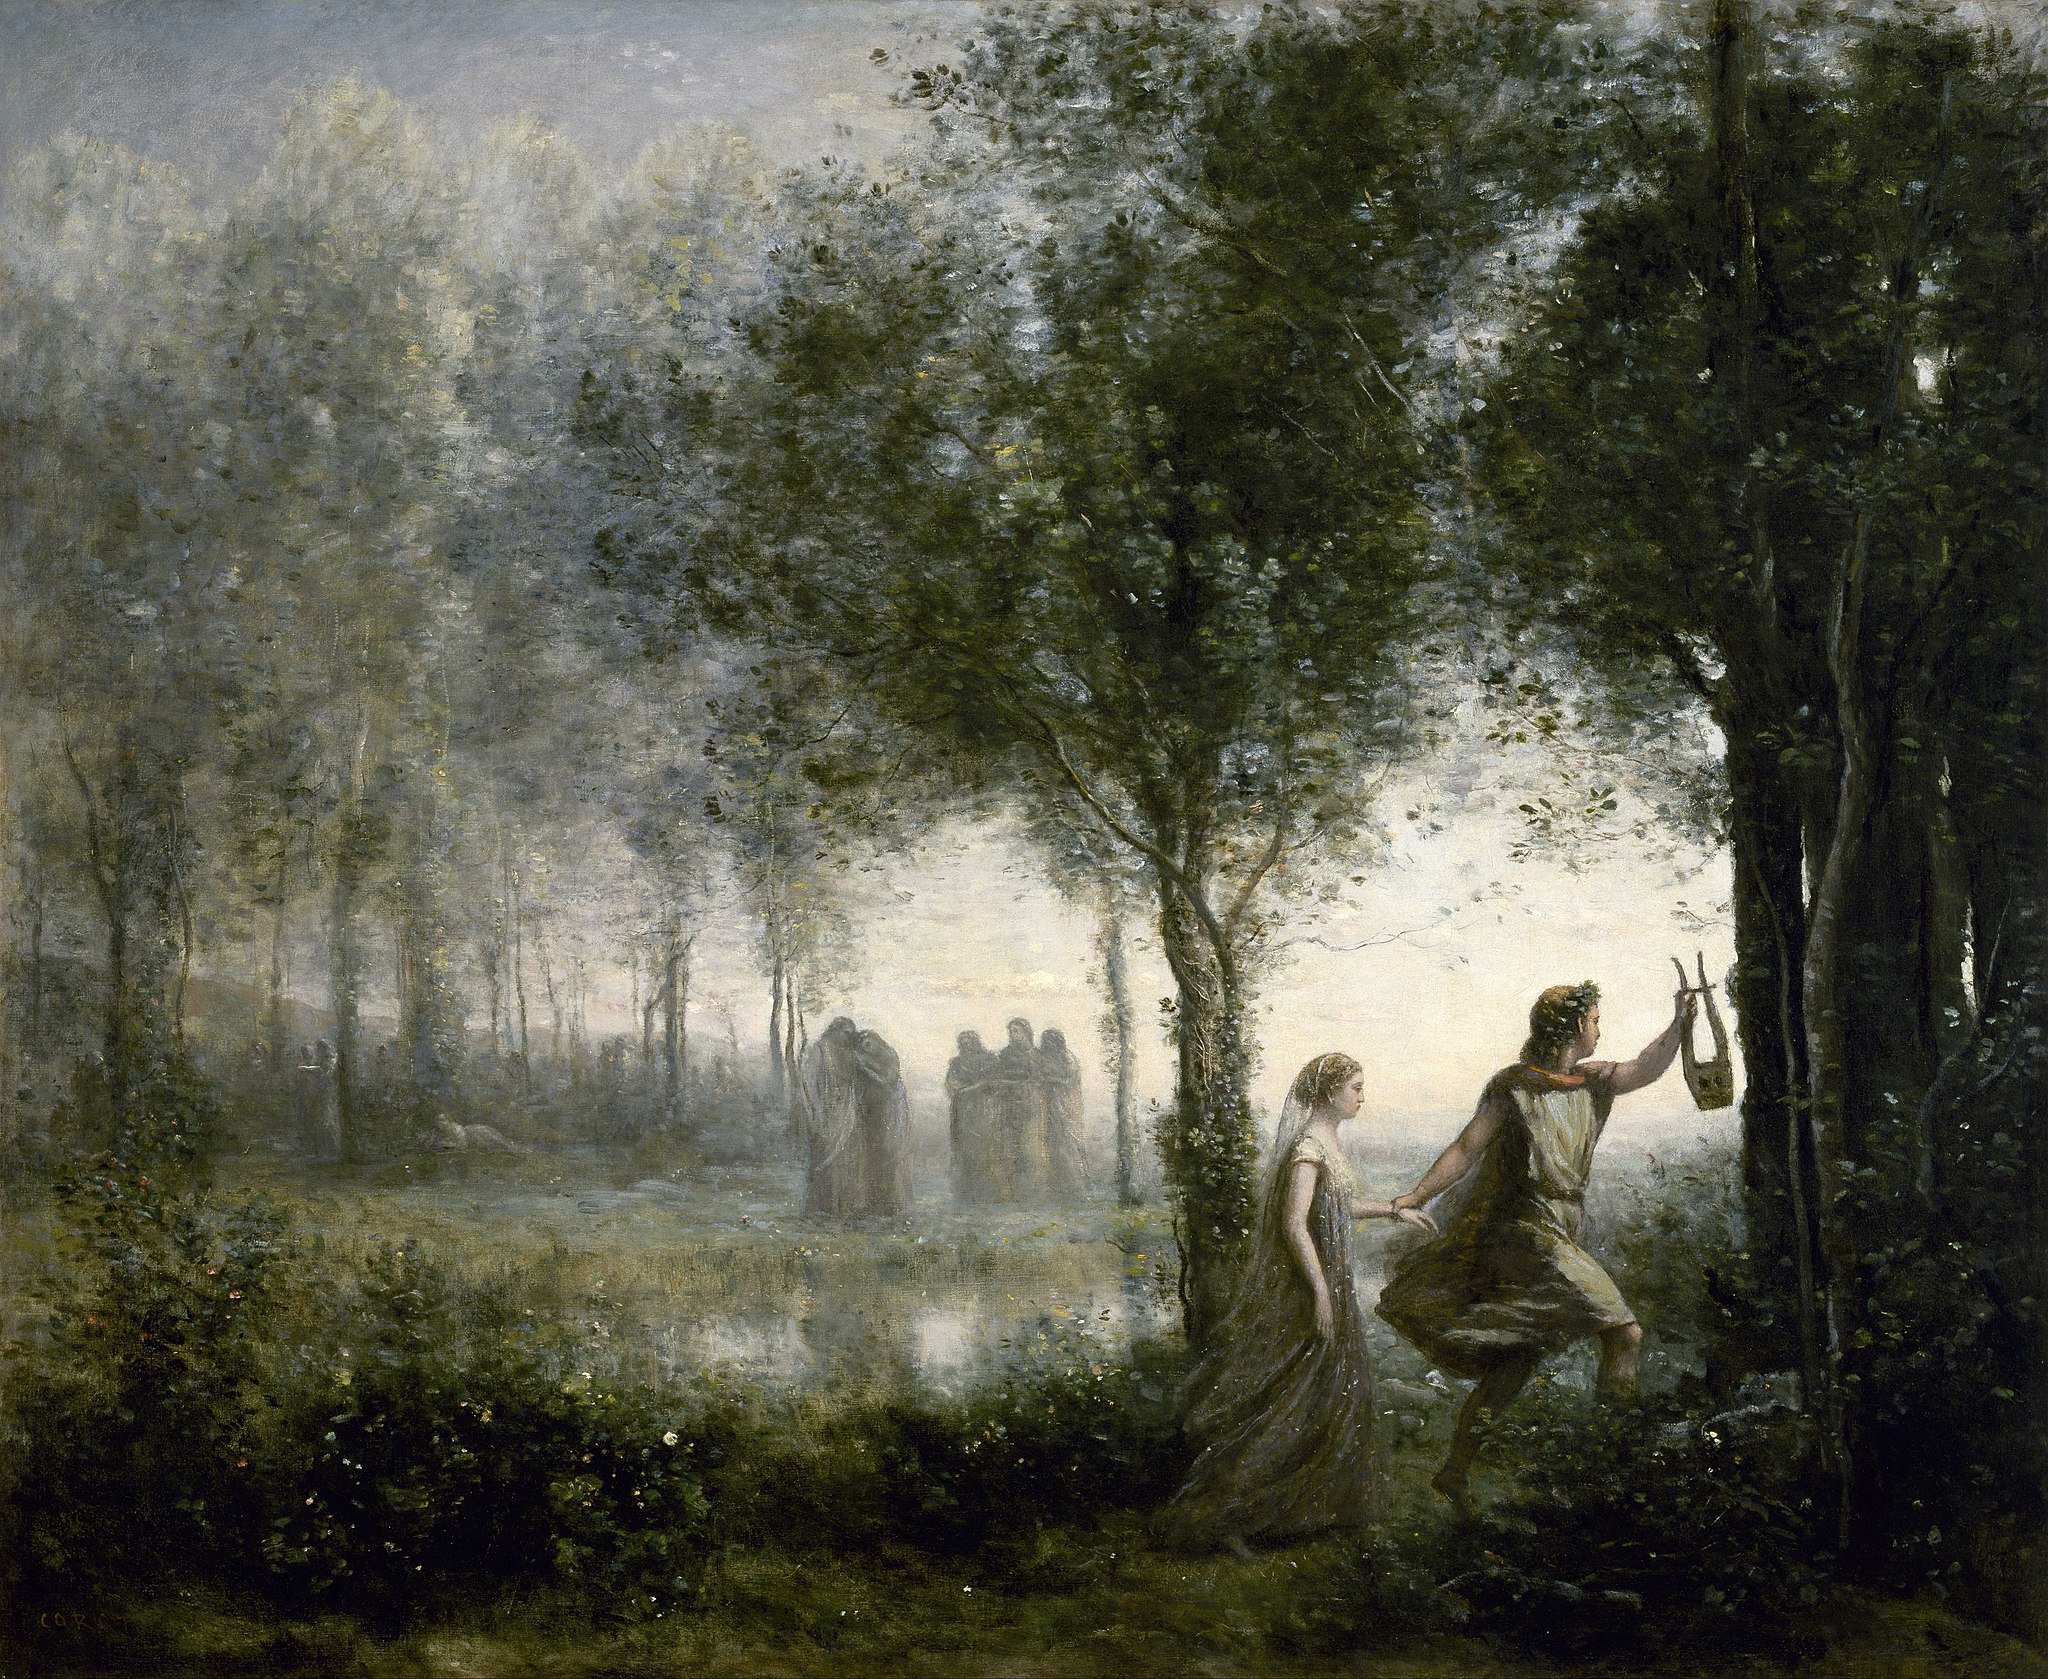 A painting of two figures running through a forest. The painting is darker in nature. The setting is in a dark foggy forest landscape with tall trees and pond in the background.